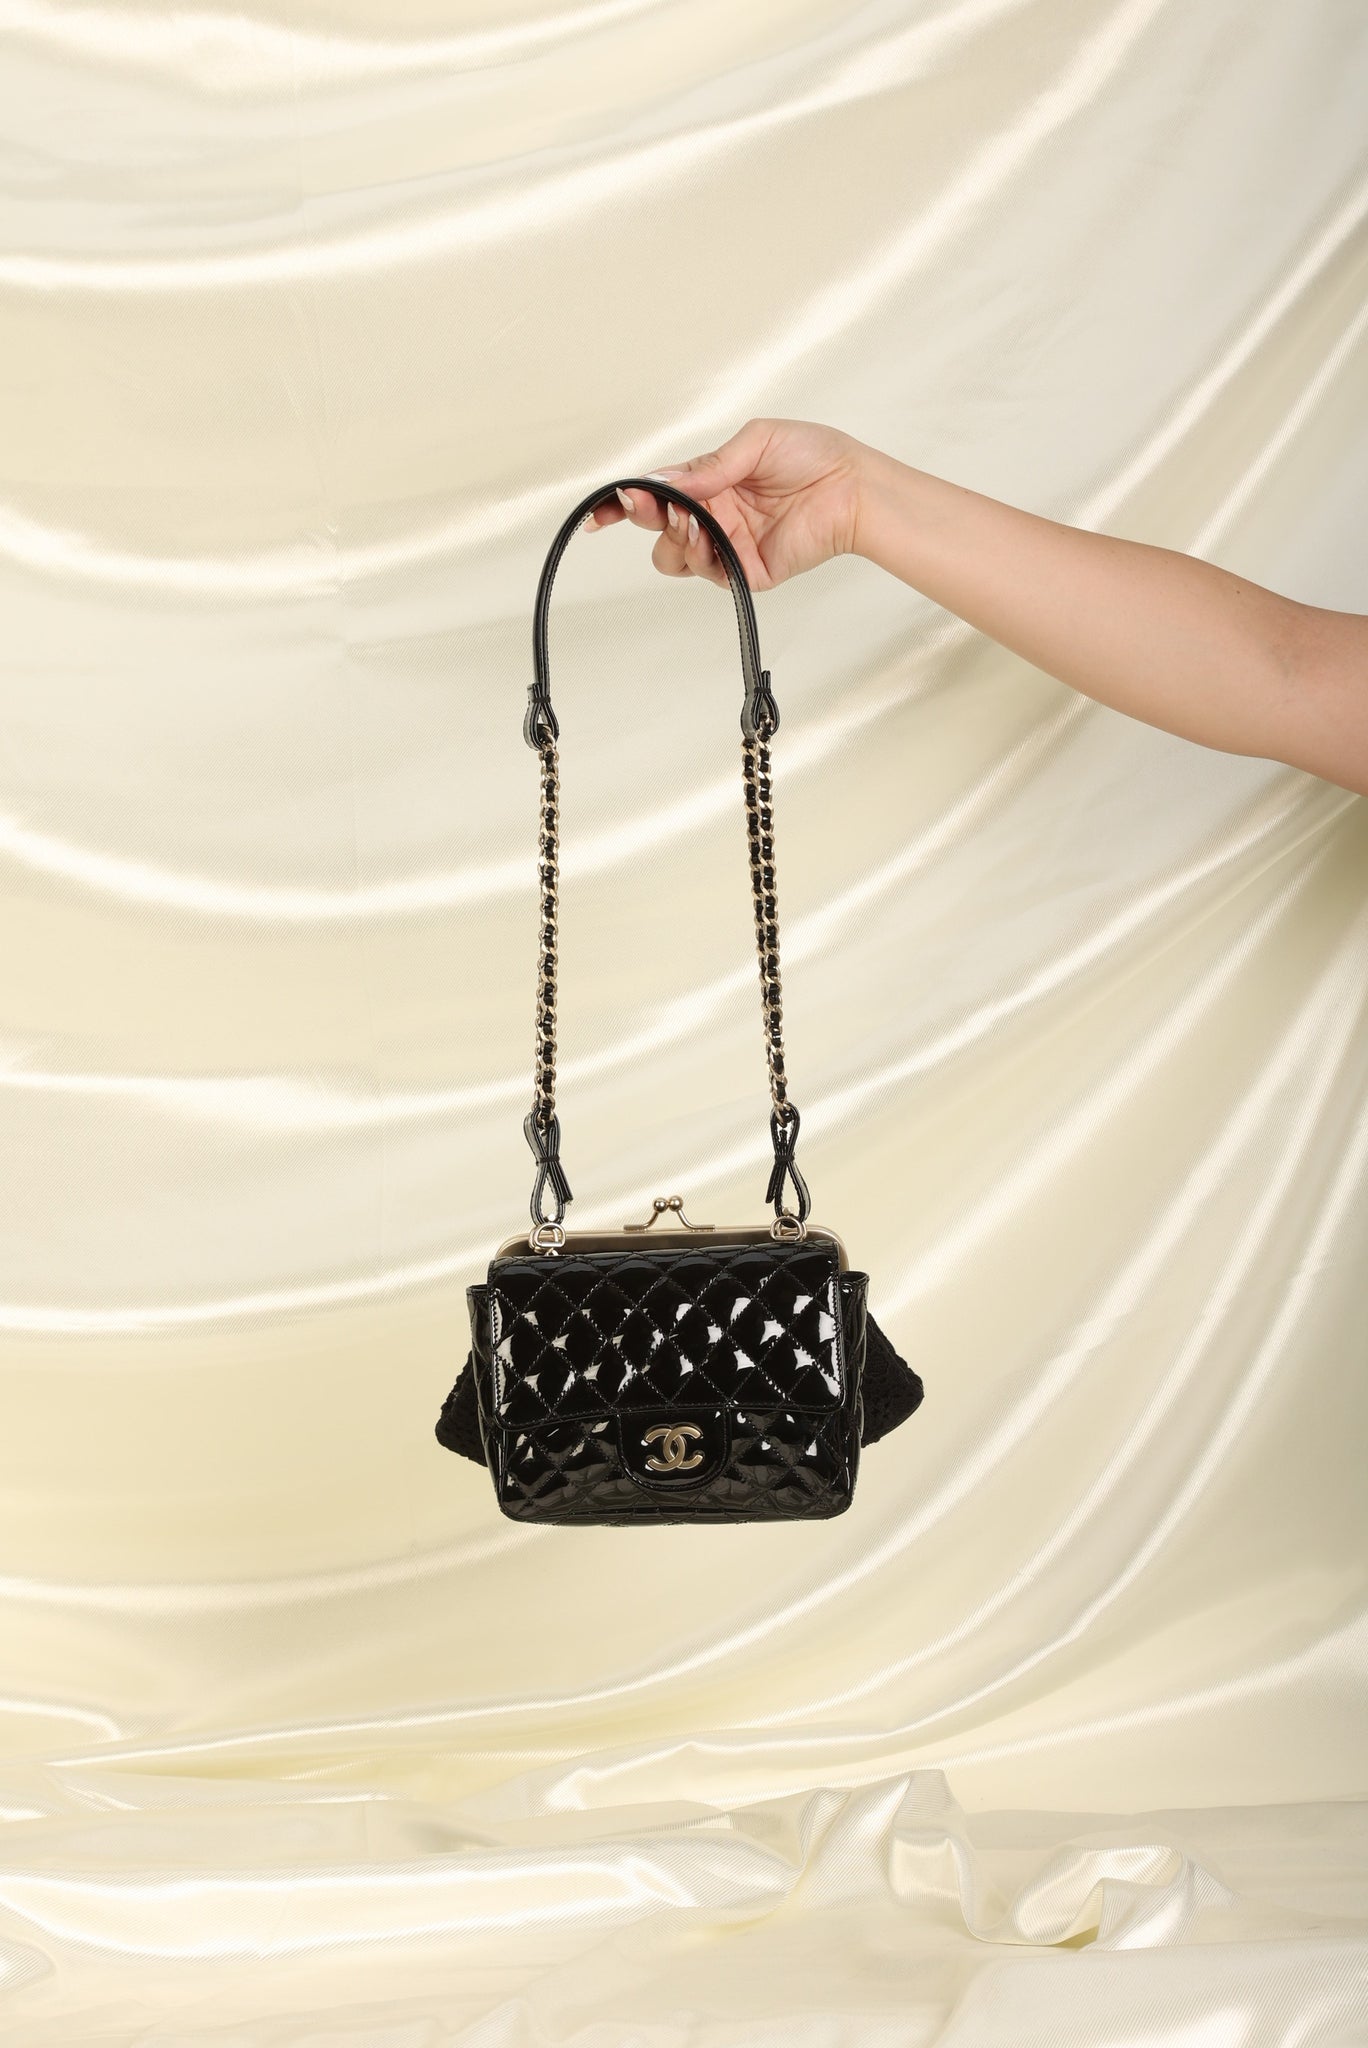 Limited Edition Chanel Crochet & Patent Double Bag – SFN